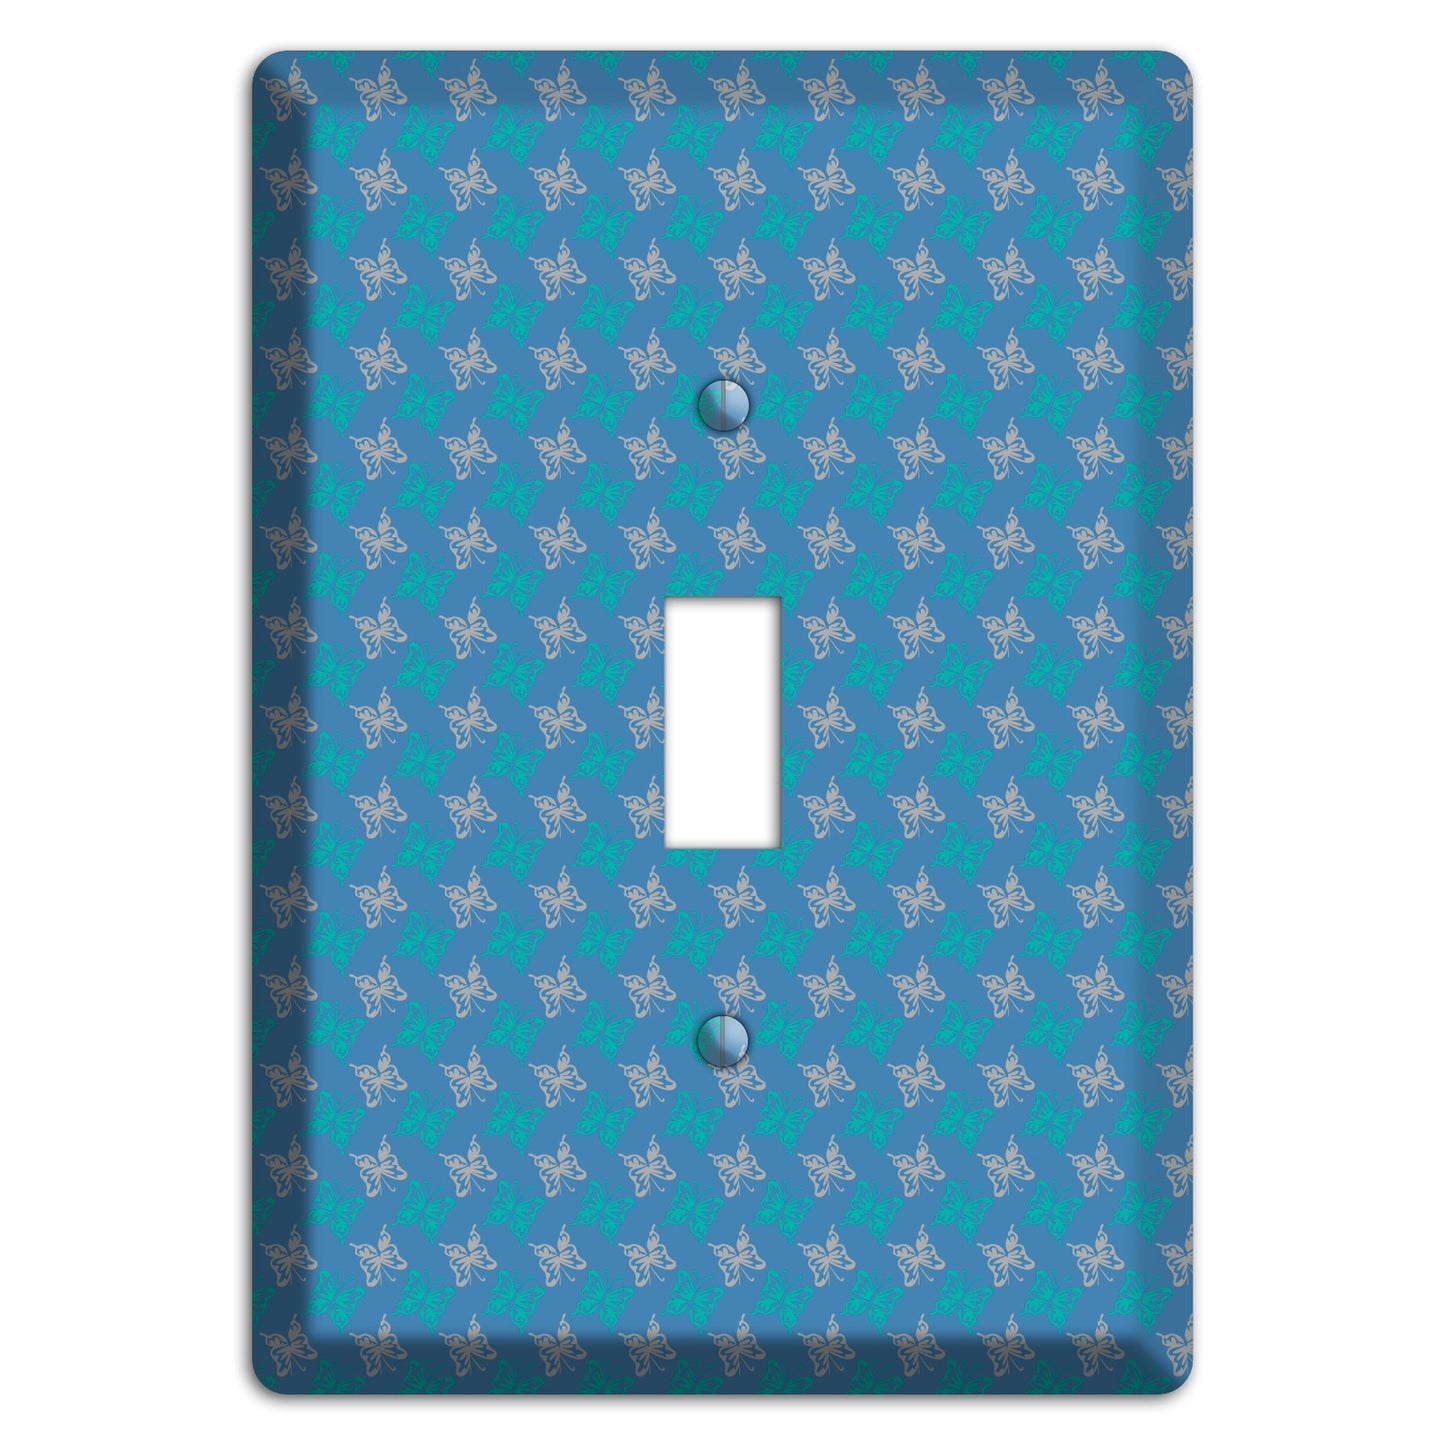 Blue with White and Turquoise Butterflies Cover Plates